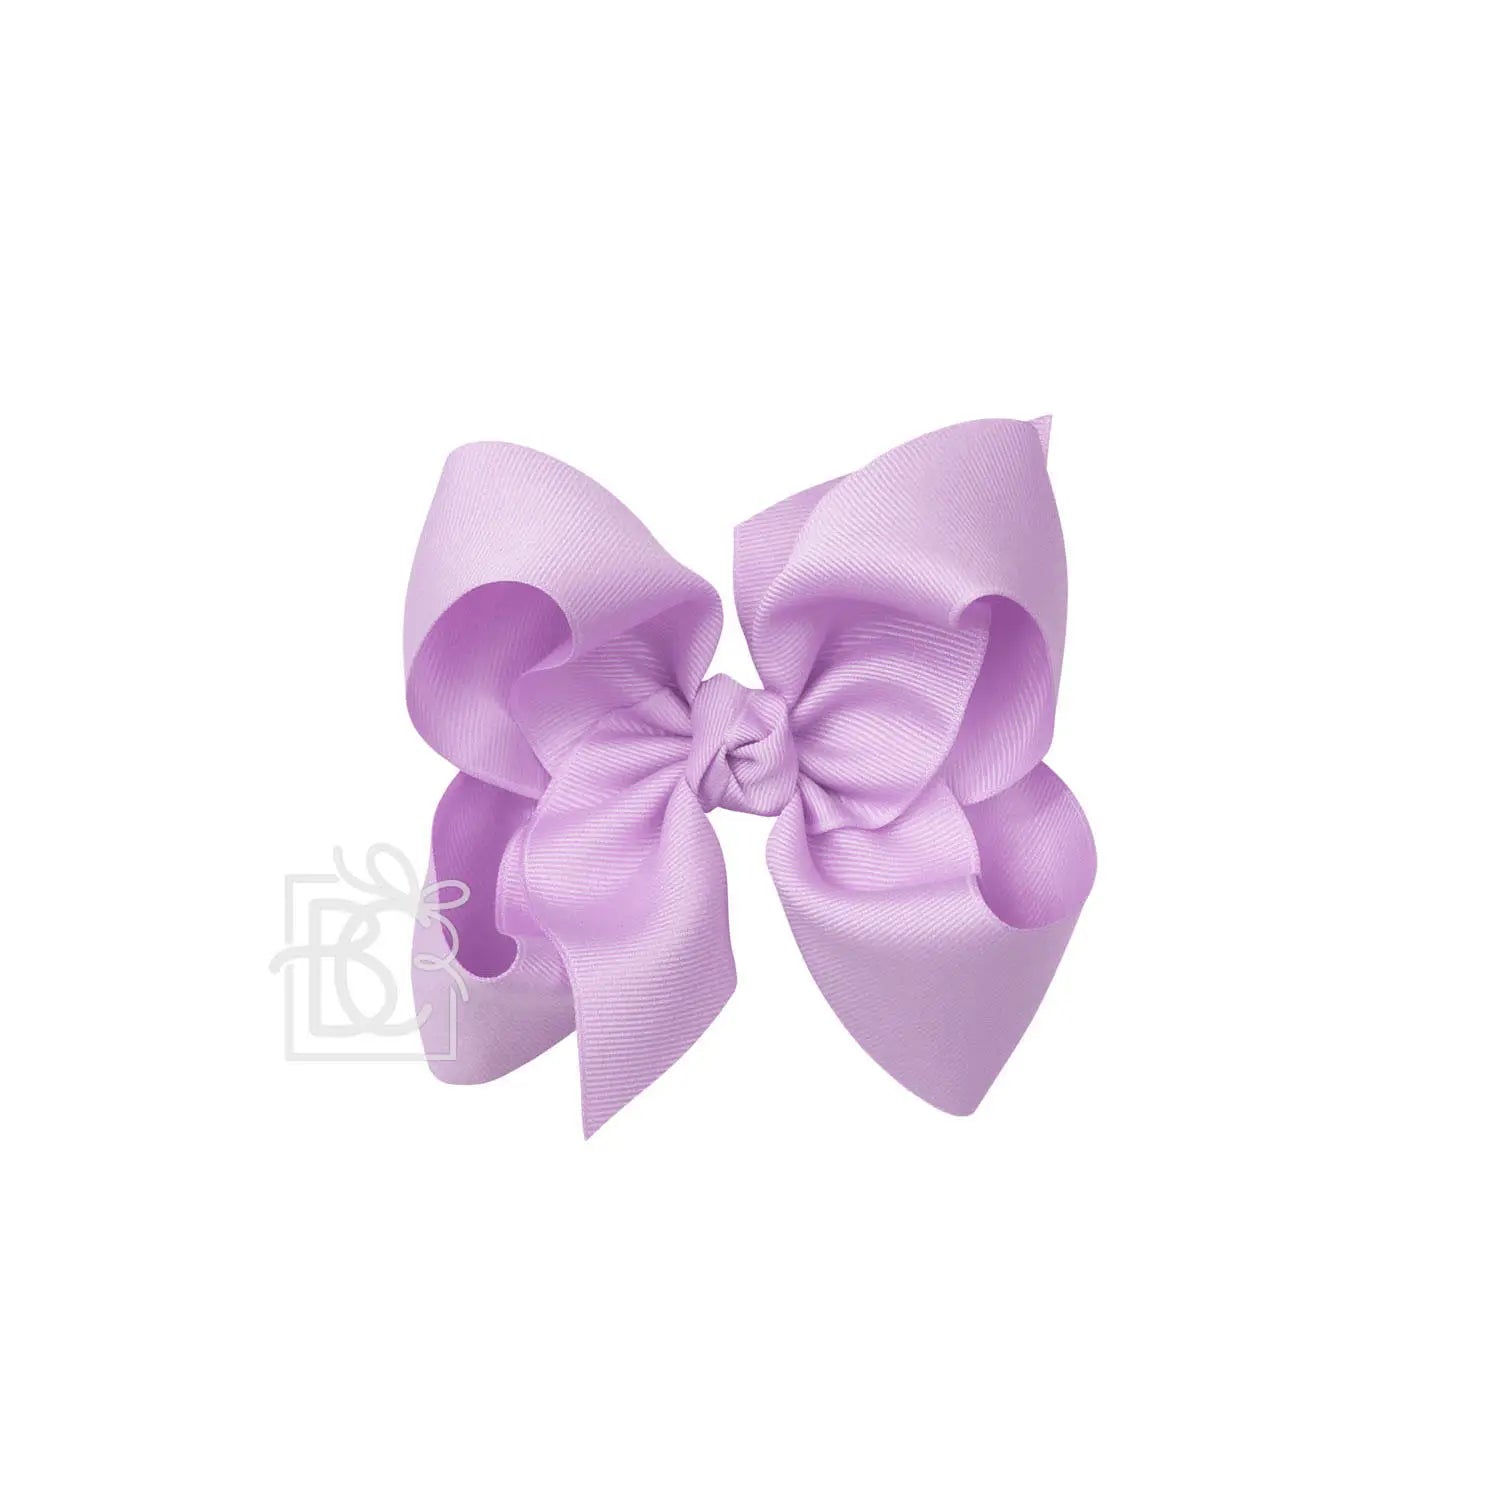 Signature Bow on Alligator Clip - Light Orchid